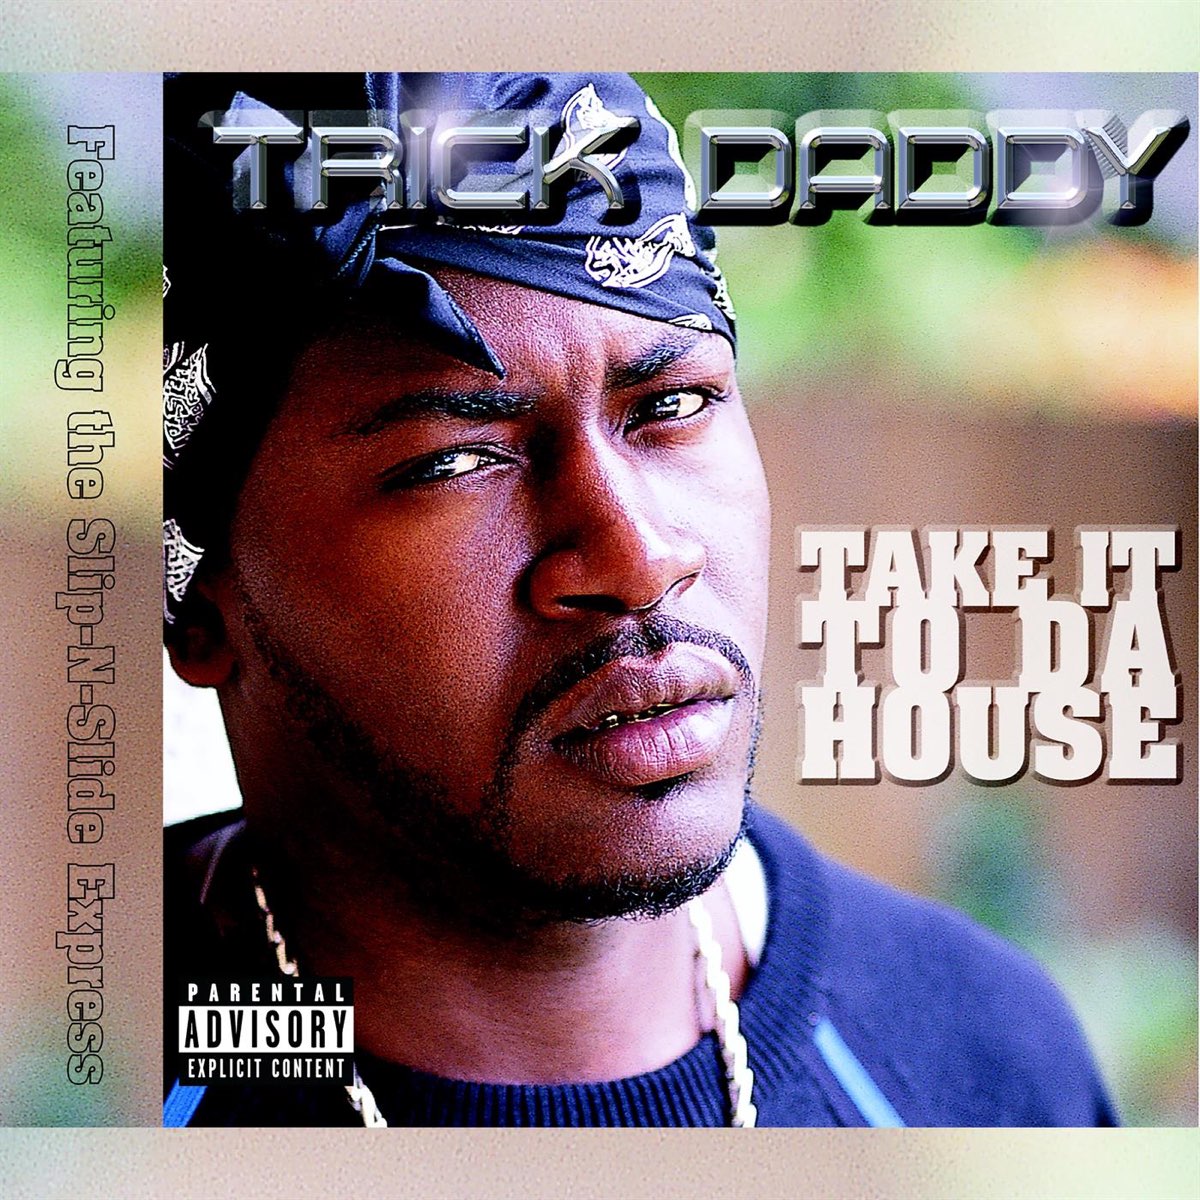 Take daddy. Trick Daddy. Cribs Trick Daddy. Straight up Trick Daddy. Xikers House of tricky album.